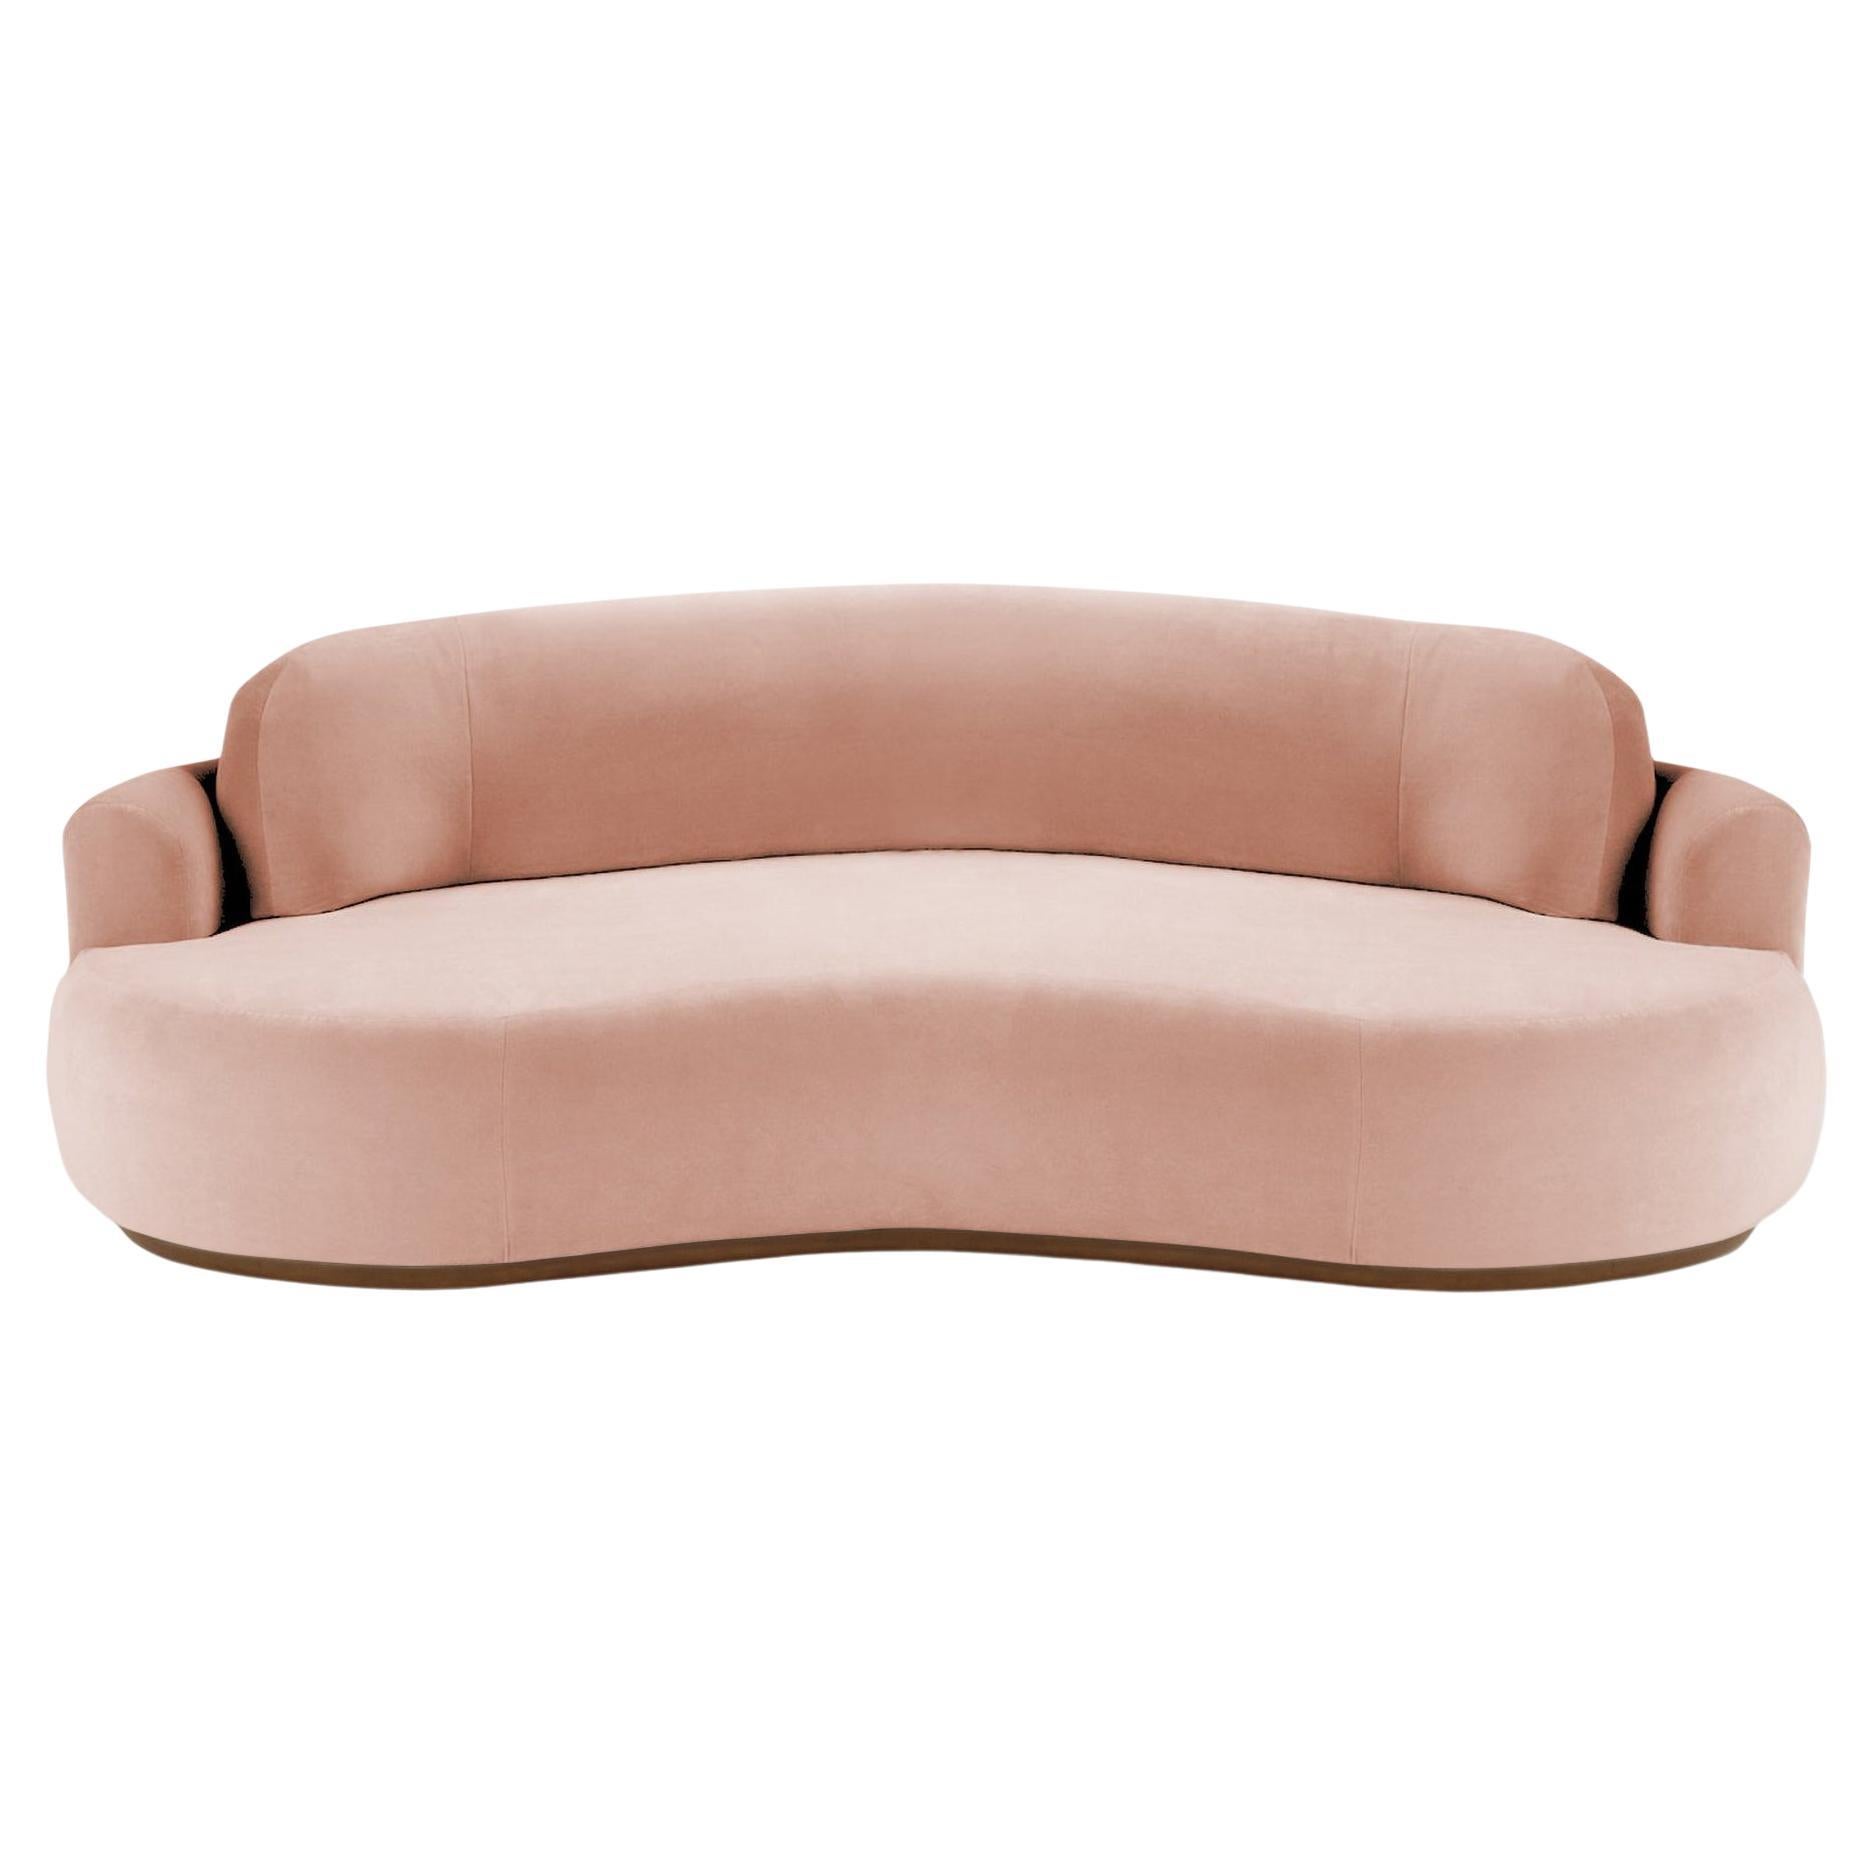 Naked Round Sofa, Large with Beech Ash-056-1 and Vigo Blossom For Sale